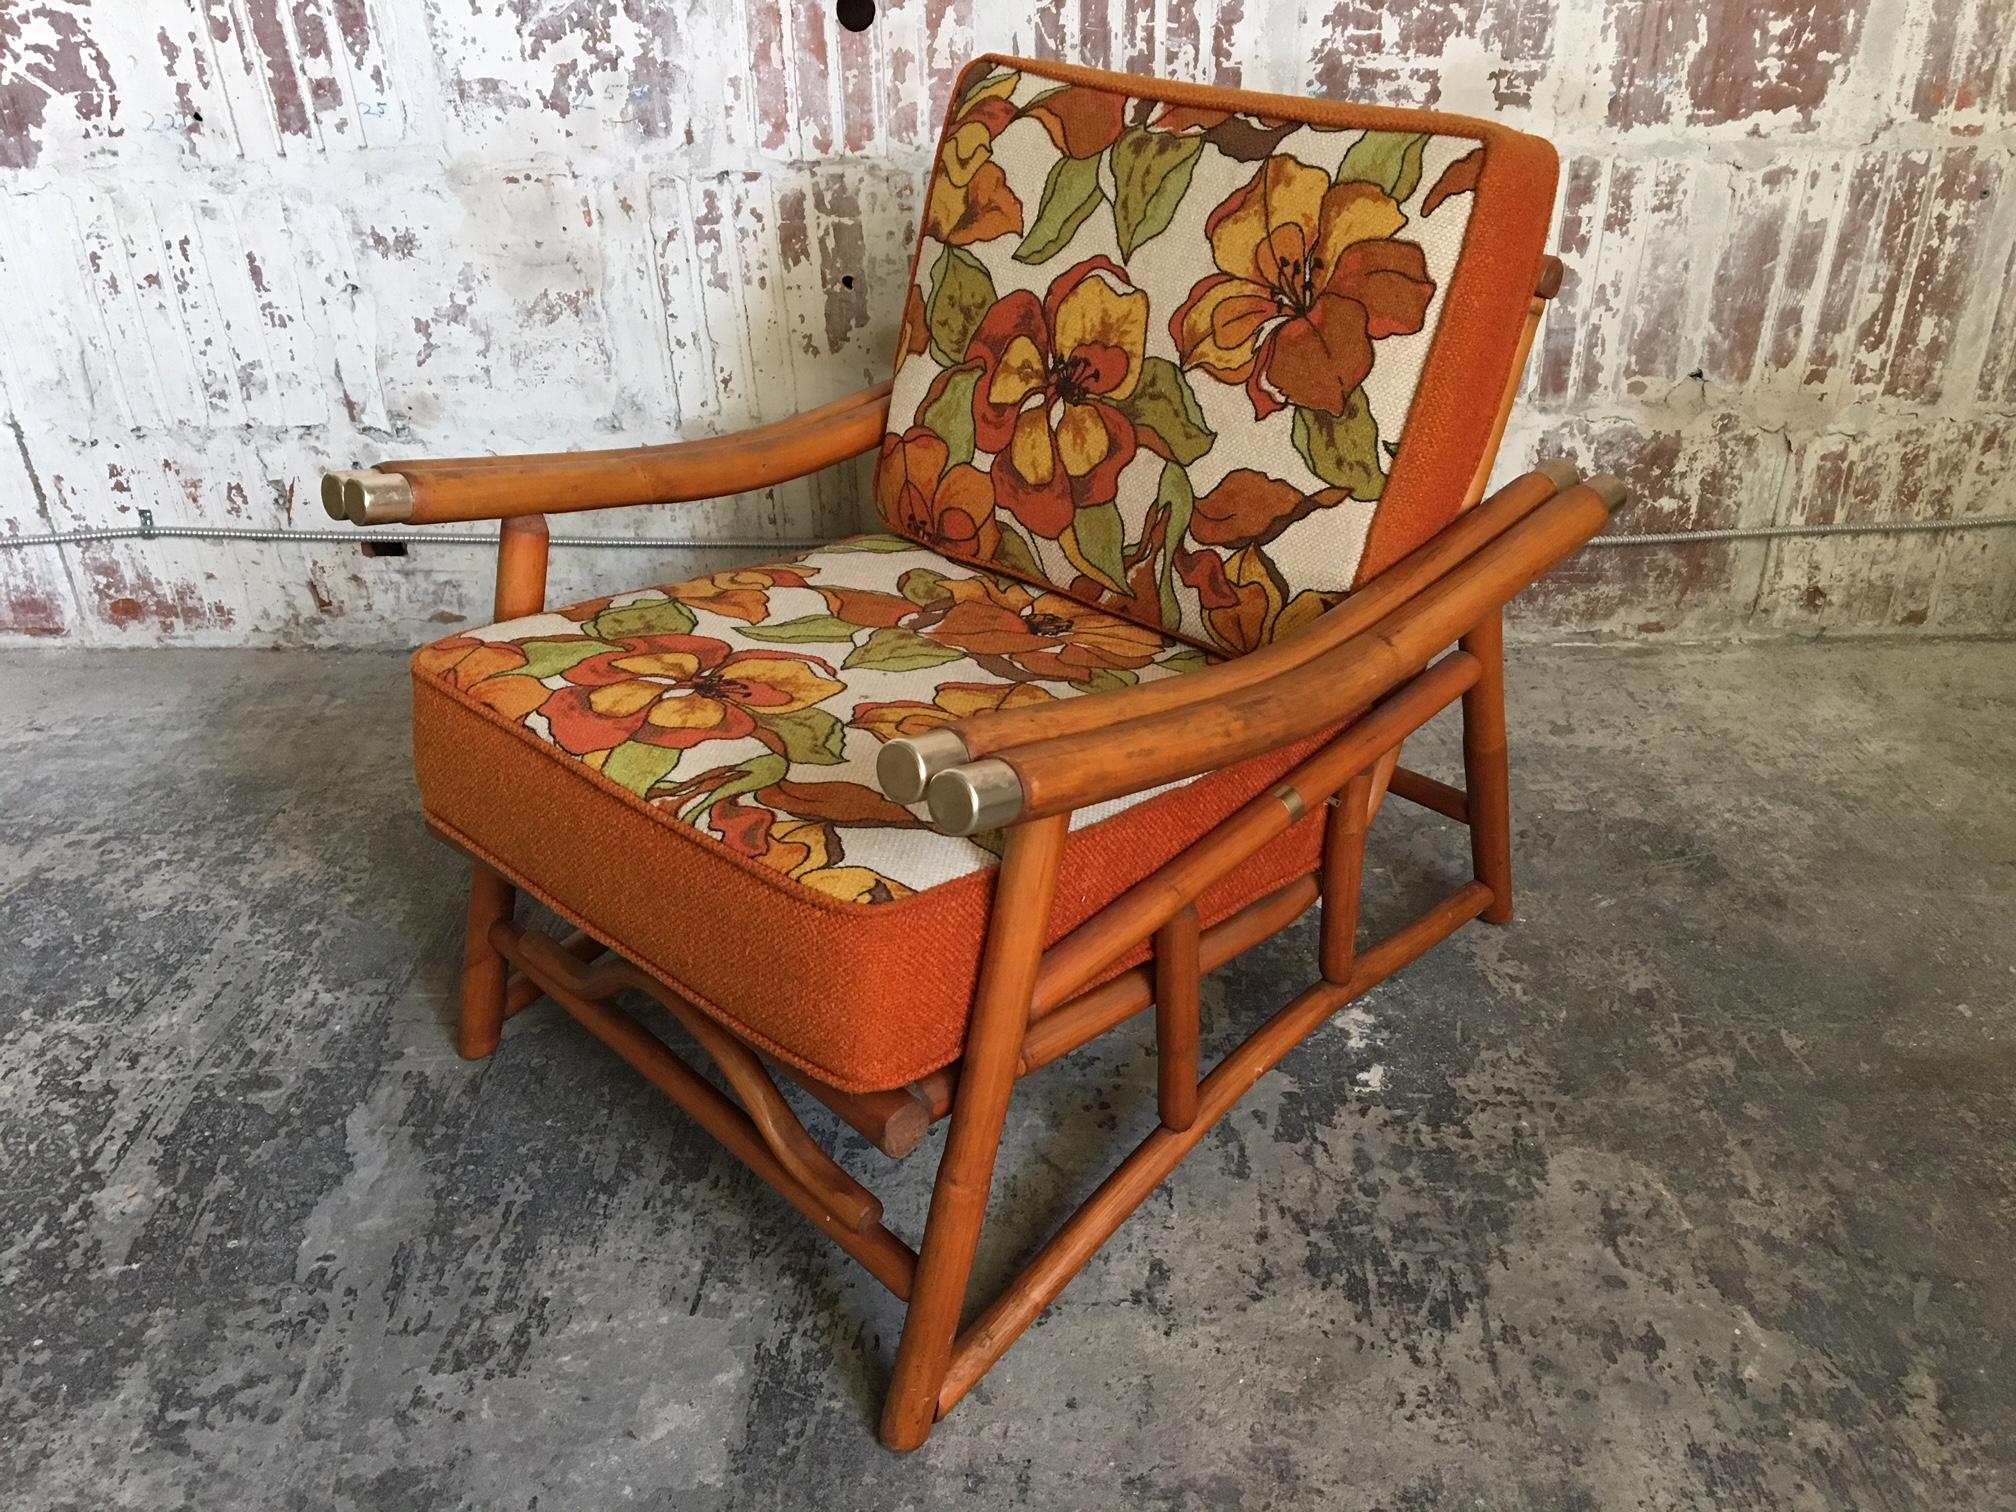 Vintage Ficks Reed bamboo at it's finest. Armchair with floral upholstered cushions and a low, lounge-like stance. Very good condition with only very minor signs of age appropriate wear.  Professional reupholstery available, ask for details.